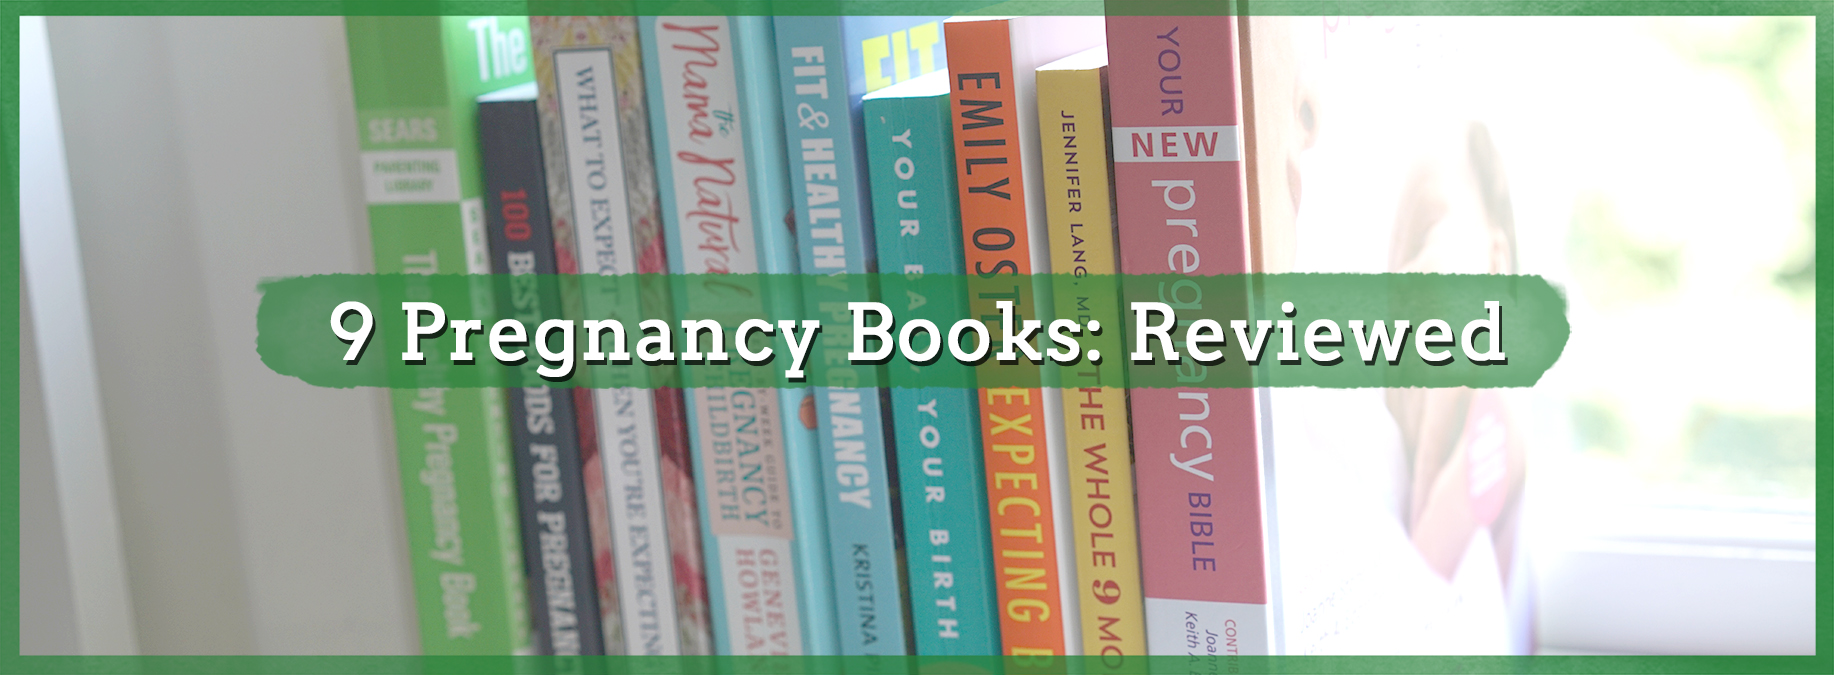 9 Pregnancy Books: Reviewed by a First Time Mom - Happy Little Tadpole